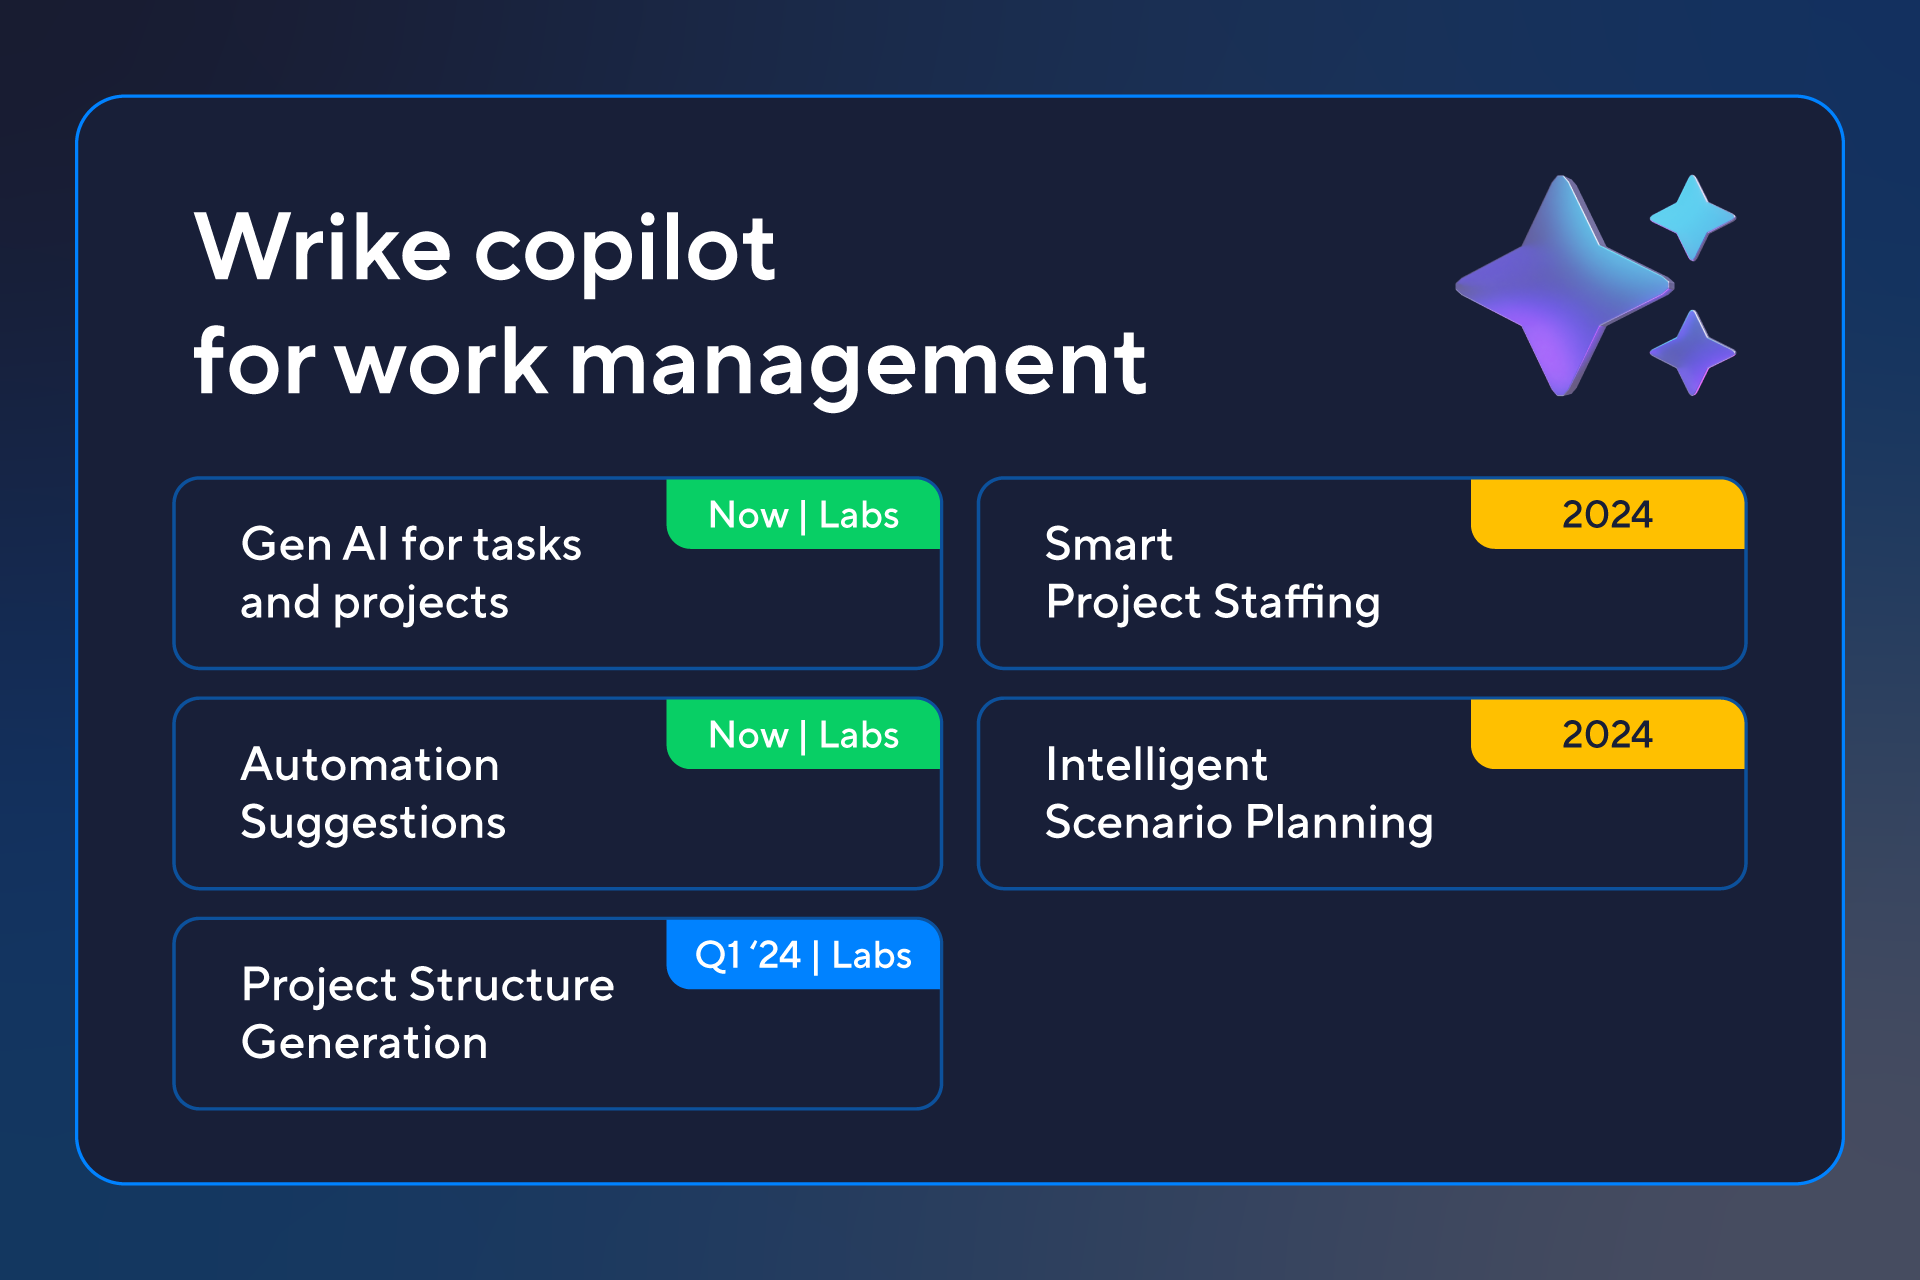 graphic view showing all features of Wrike copilot for work management